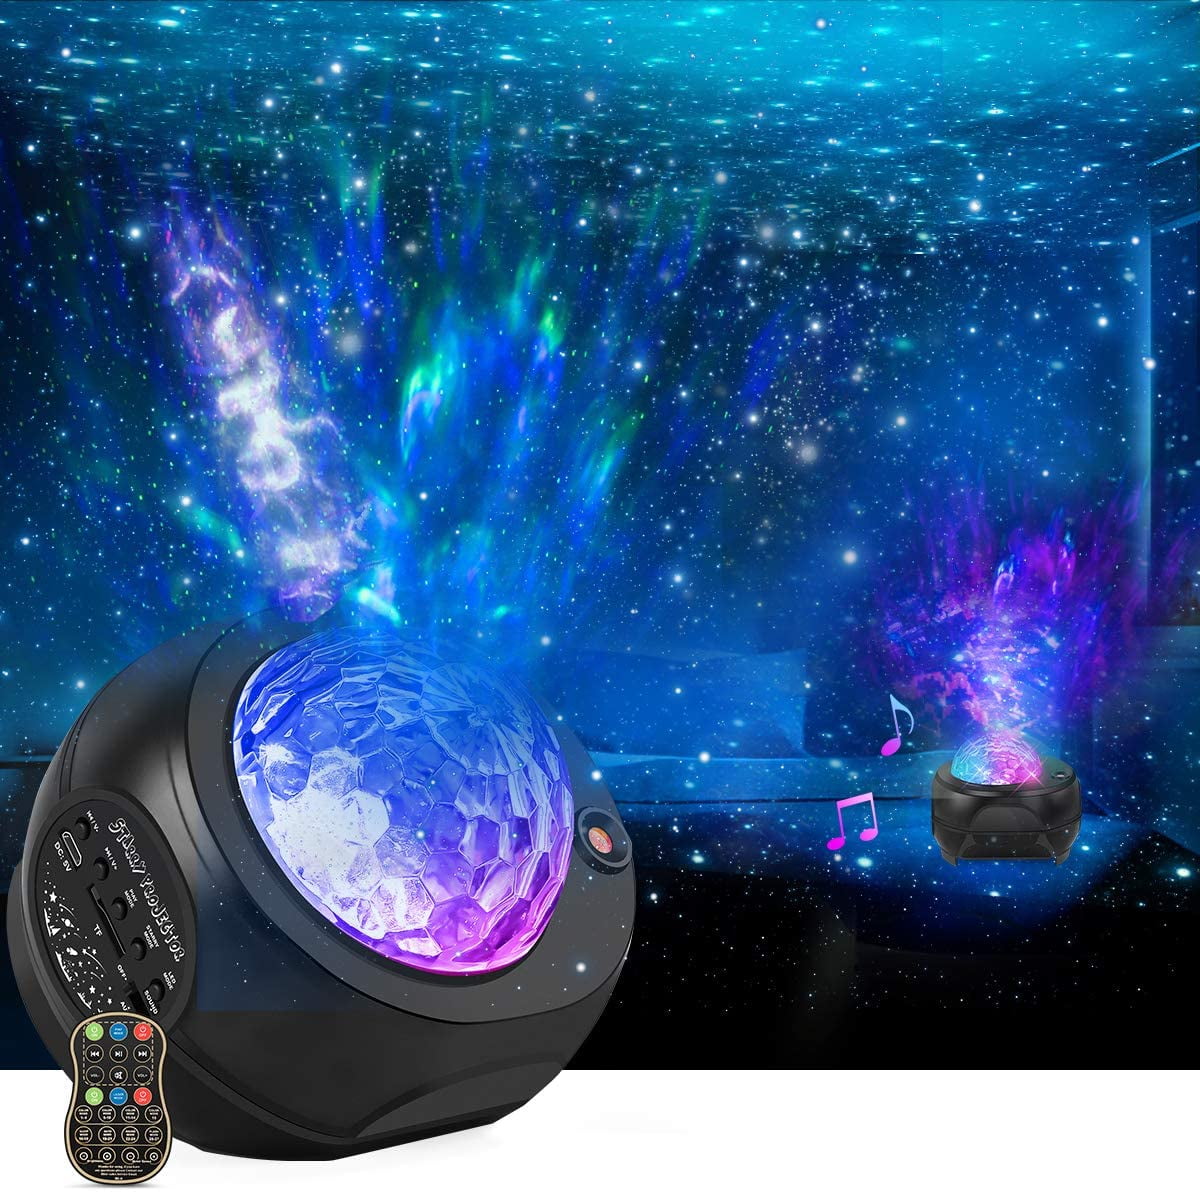 LNKOO Star Projector Night Lights, 3 in 1 Galaxy Projector Light, Sky  Nebula/Moving Ocean Wave, Best Gift for Kids Adults for Bedroom/Party with  Hi-Fi Stereo Bluetooth Speaker, Voice&Remote Control 